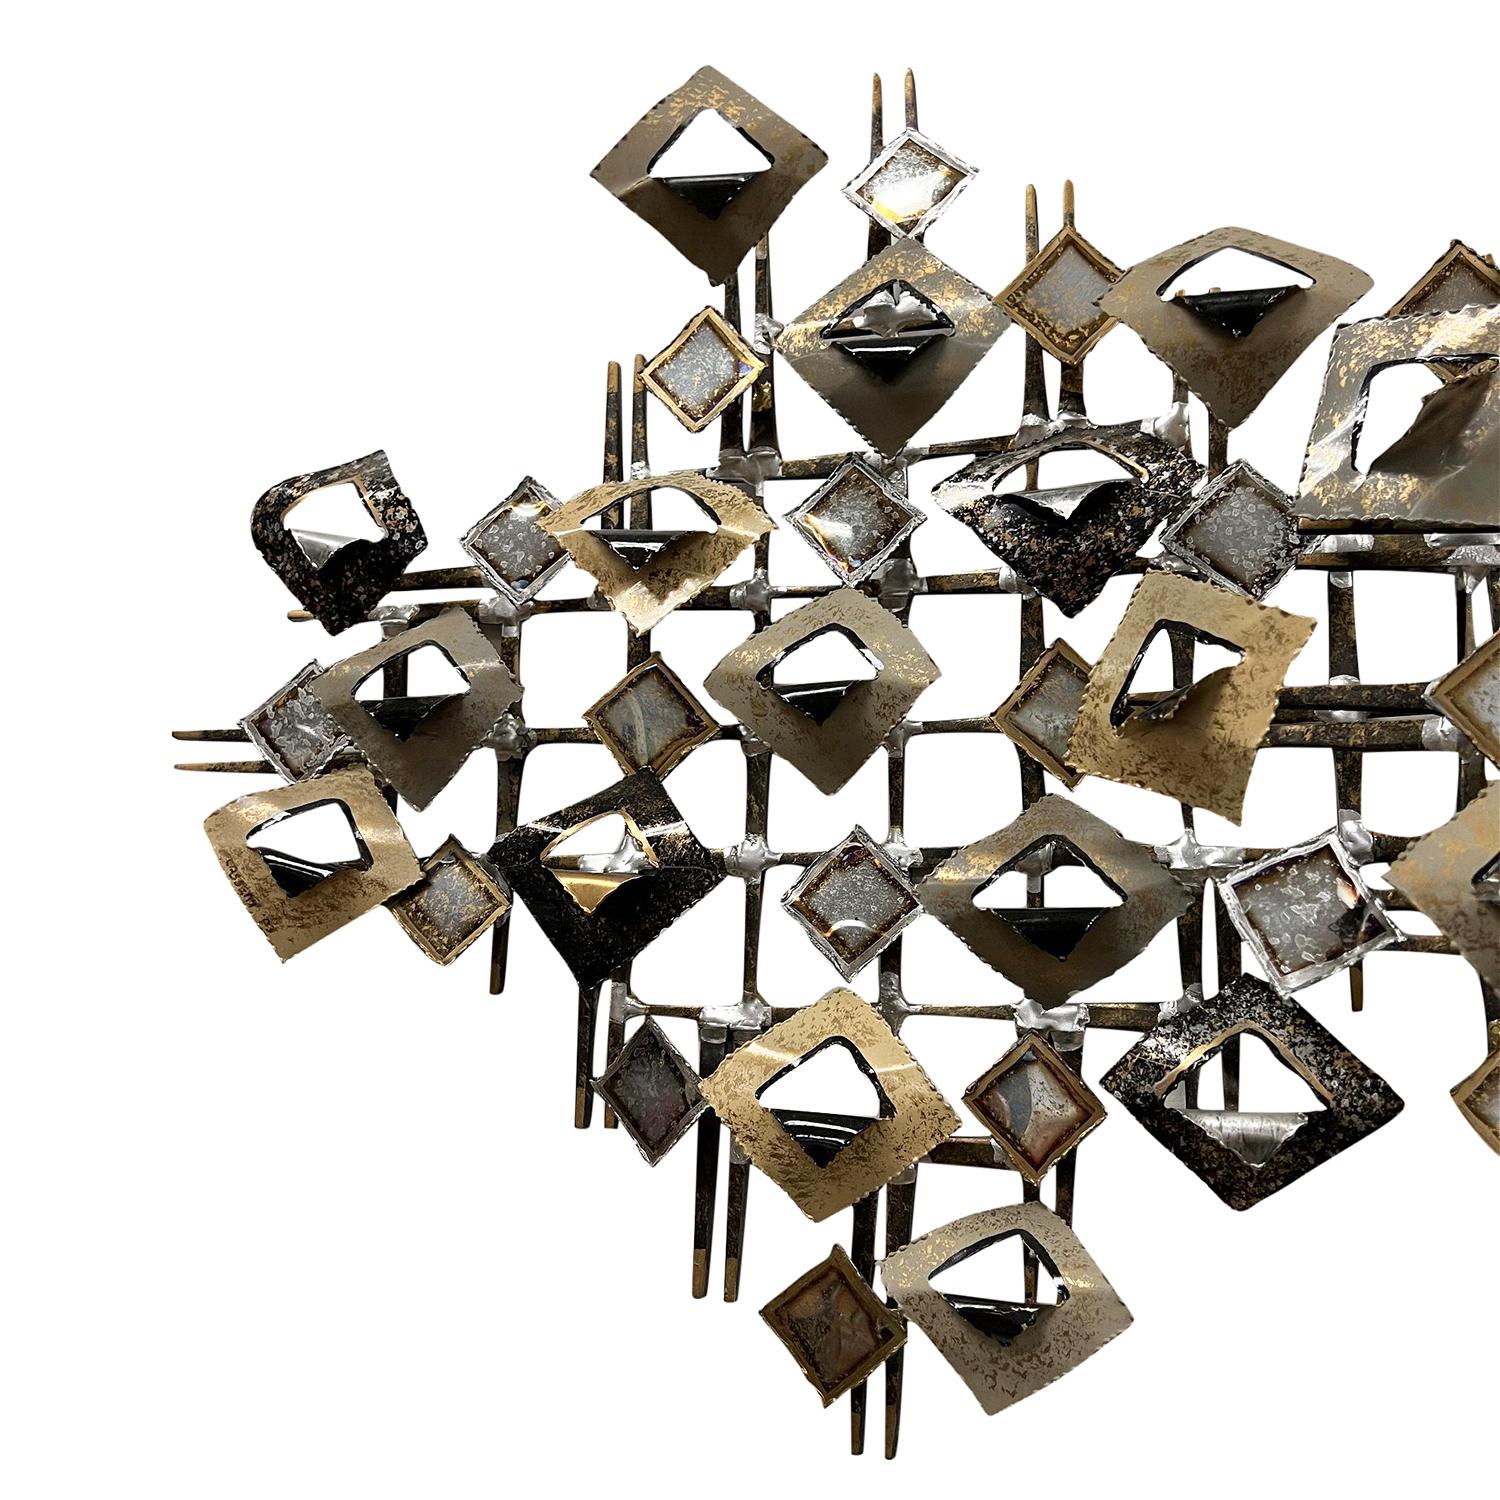 A black-grey, late vintage Mid-Century Modern American abstract Brutalist wall sculpture made of hand crafted gilded metal, designed by Linda Casetti in good condition. The detailed large wall décor piece is enhanced by small metal pieces,